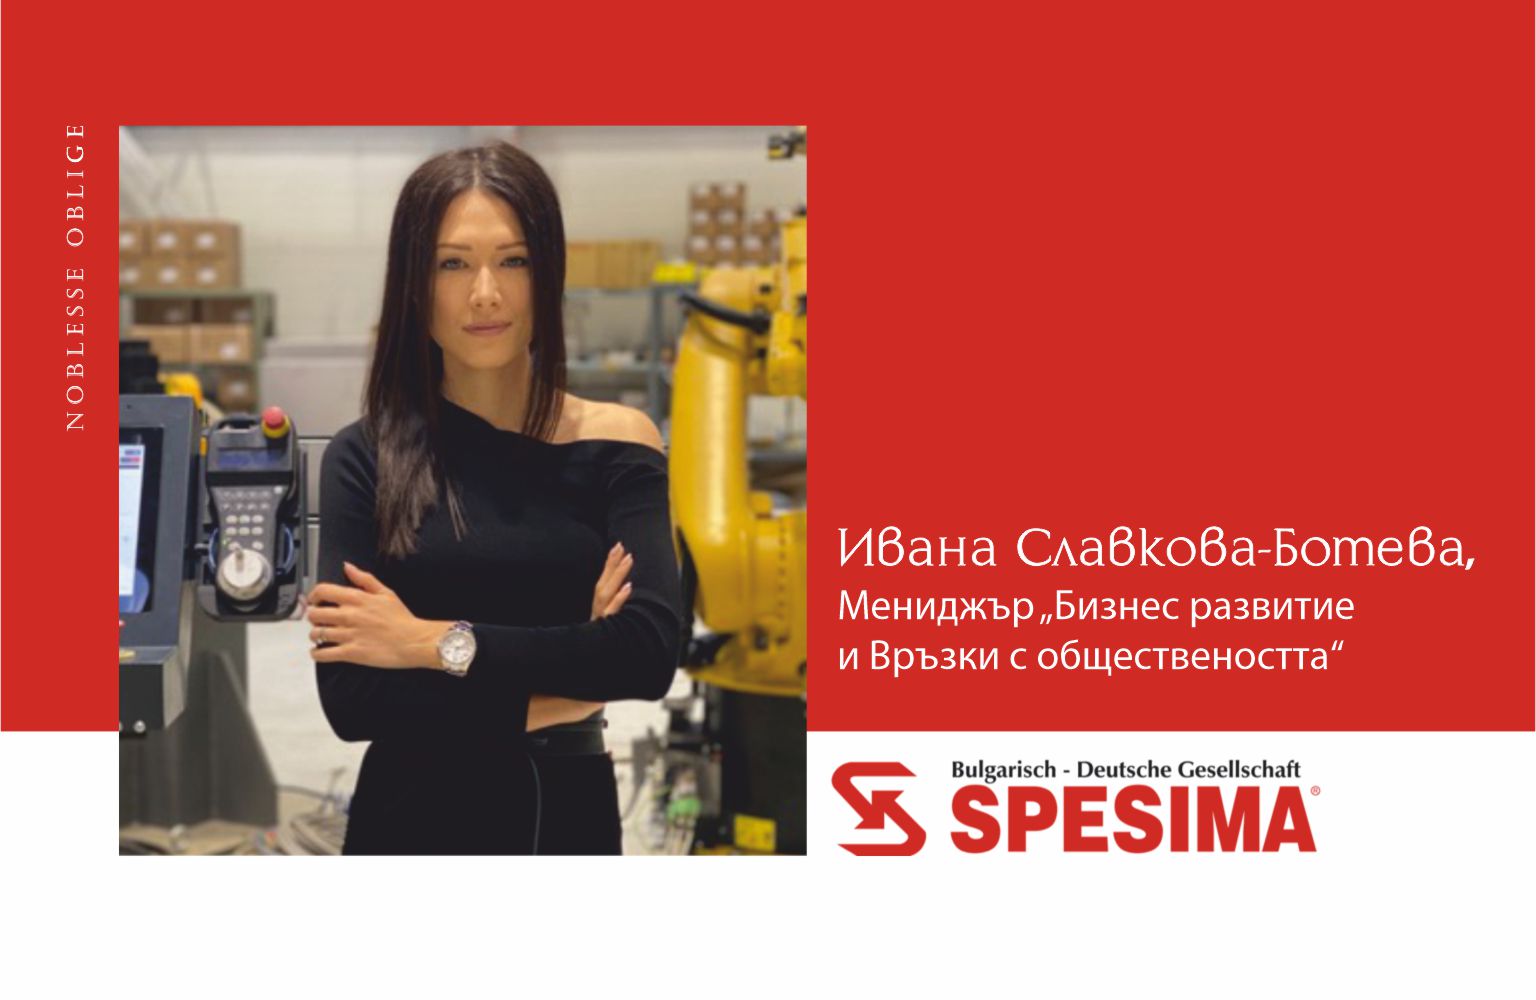 Spesima Ltd. will continue to follow the path of innovation in 2022!